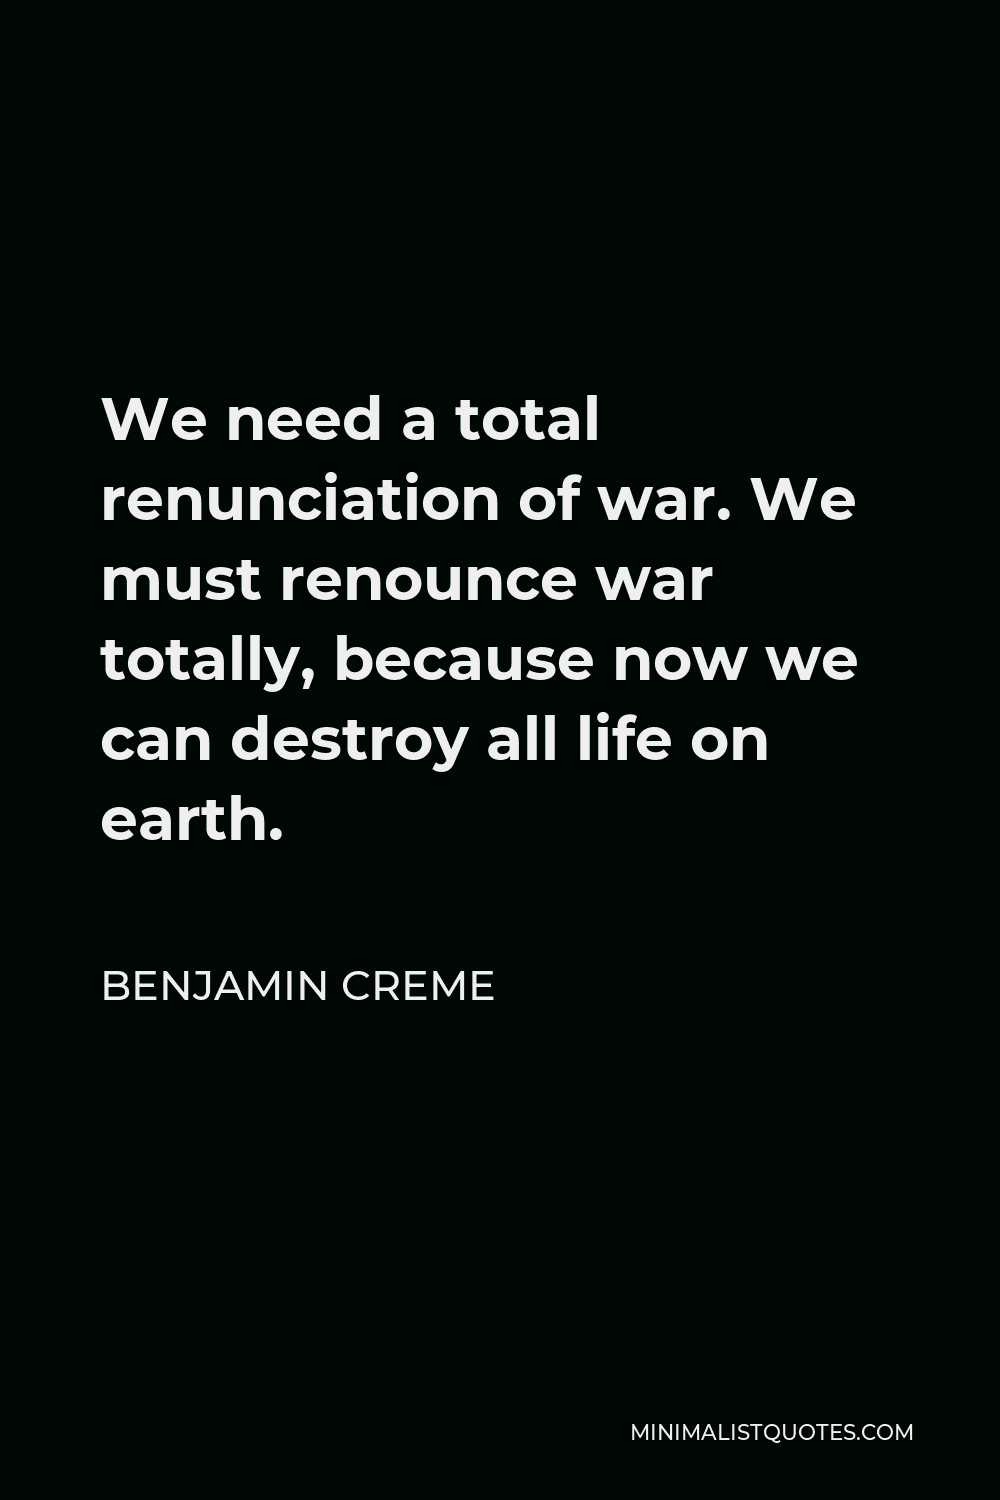 Benjamin Creme Quote - We need a total renunciation of war. We must renounce war totally, because now we can destroy all life on earth.